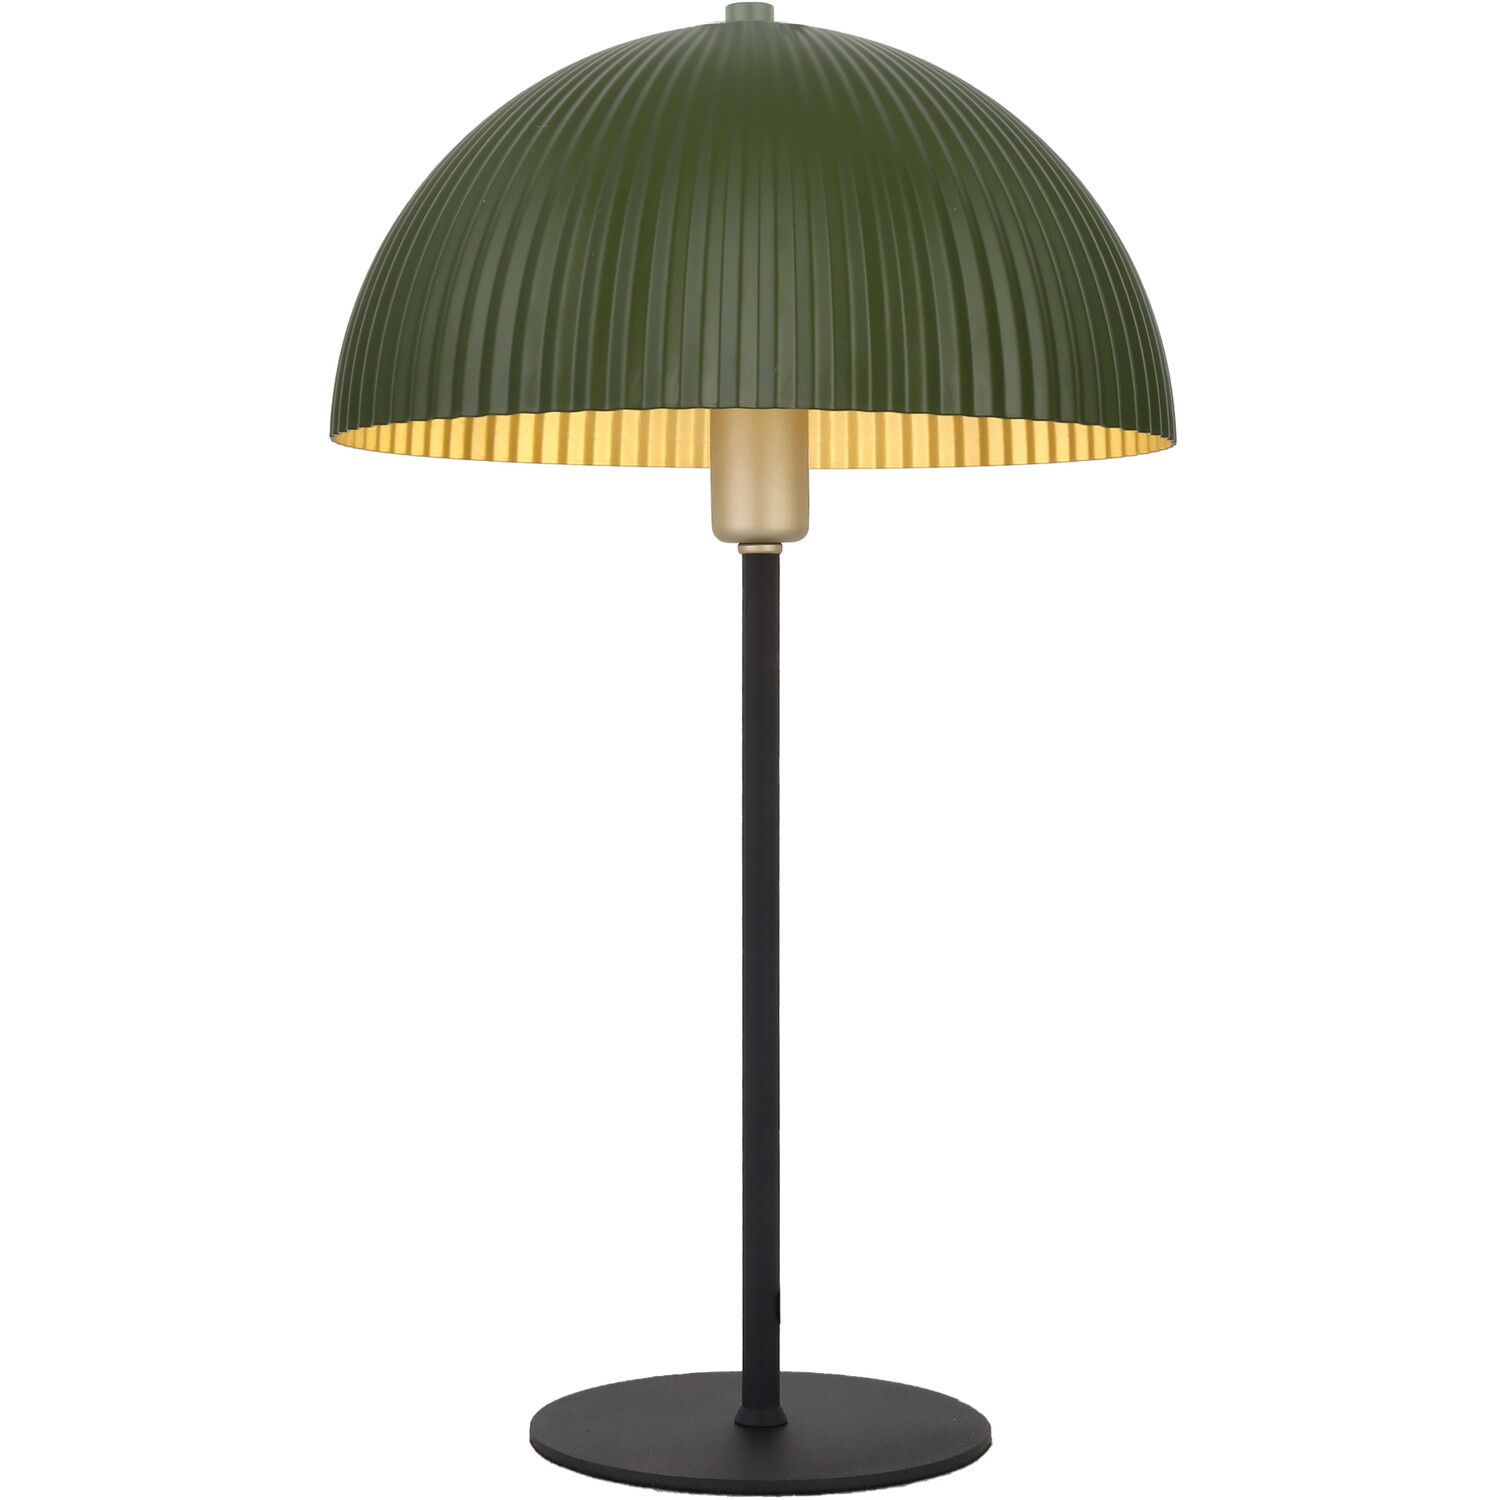 Bexley Champagne Green and Gold Table Lamp Image 1